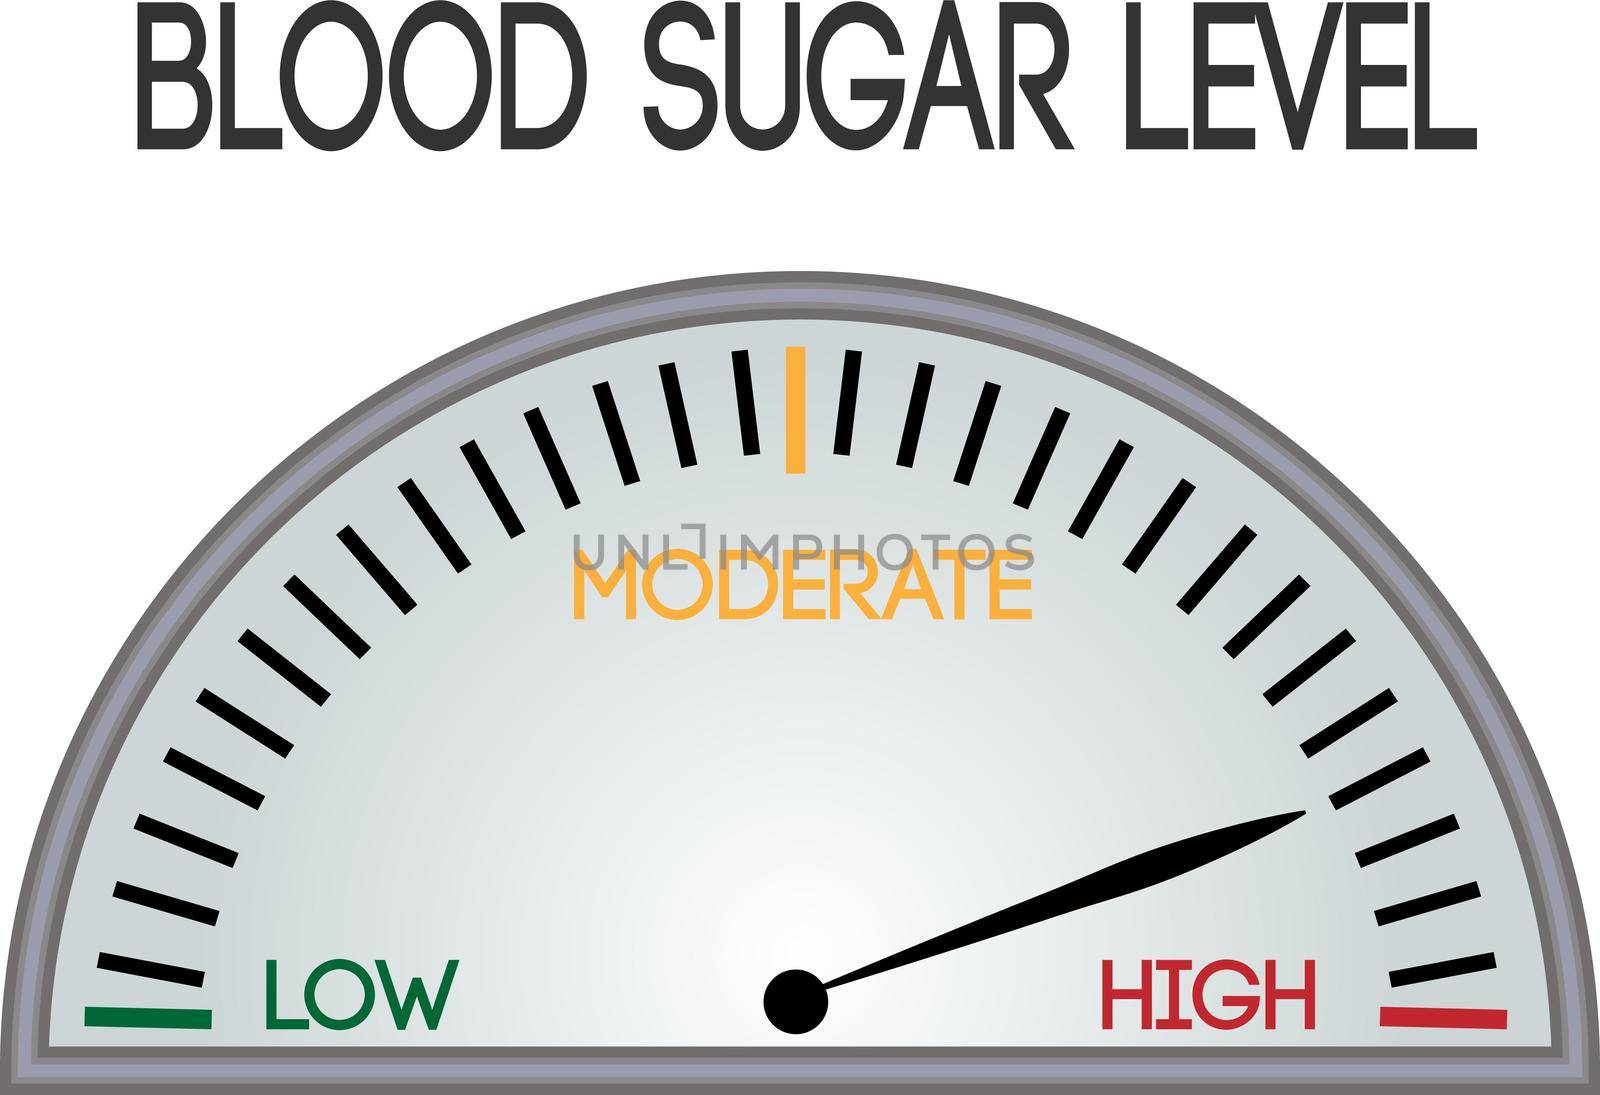 regulations blood sugar level control device vector illustration on a white background isolated